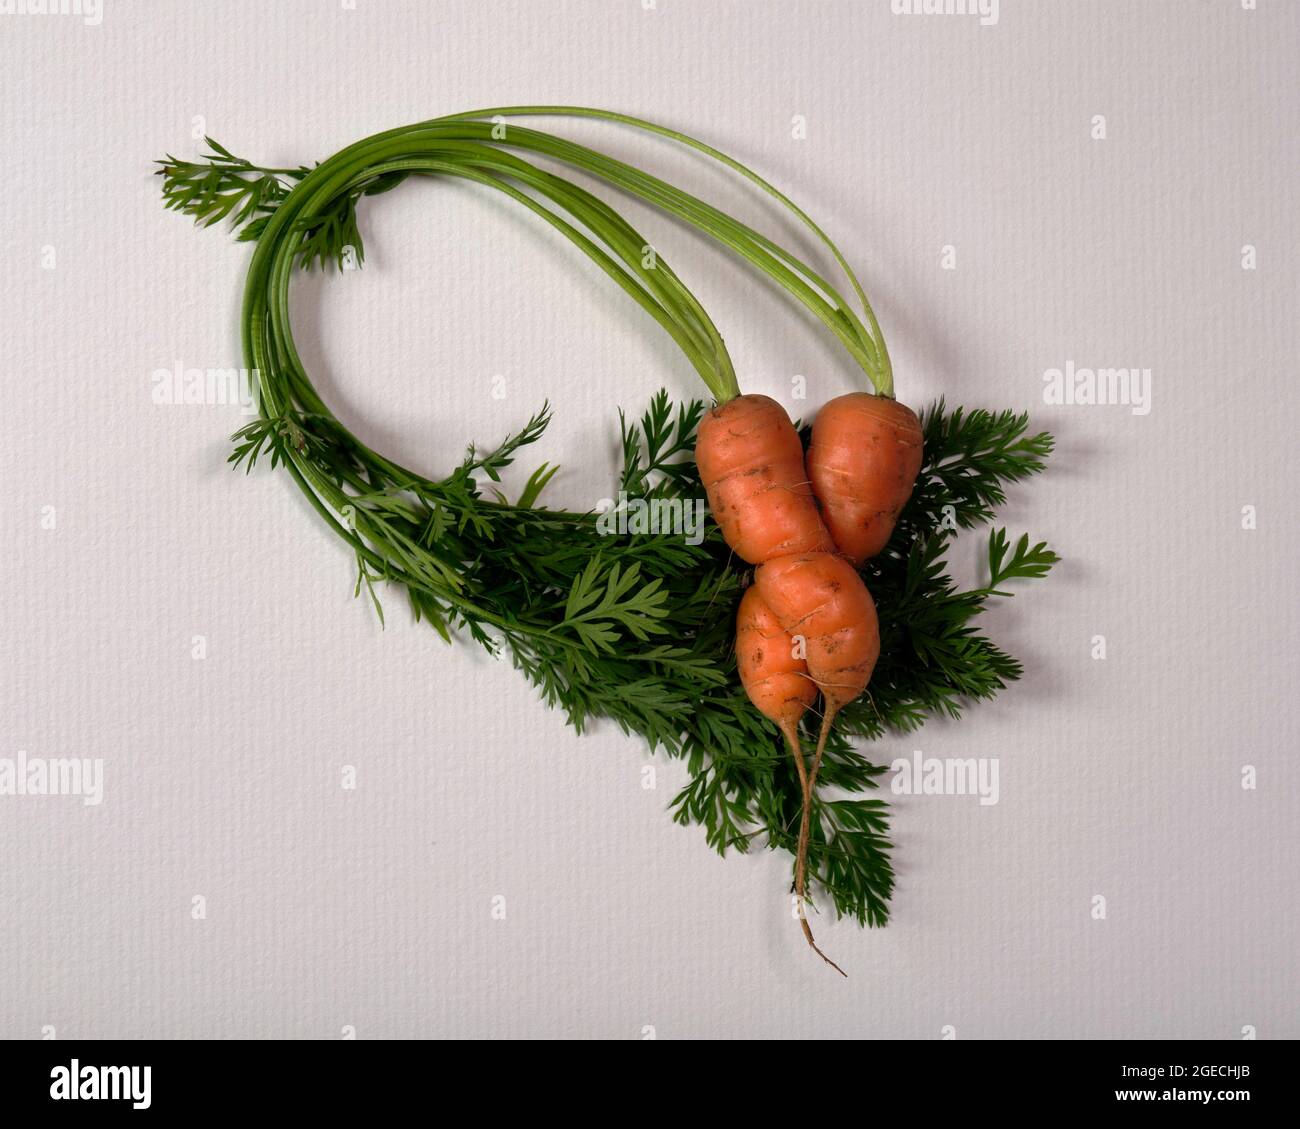 Intertwined pair of wonky carrots Stock Photo